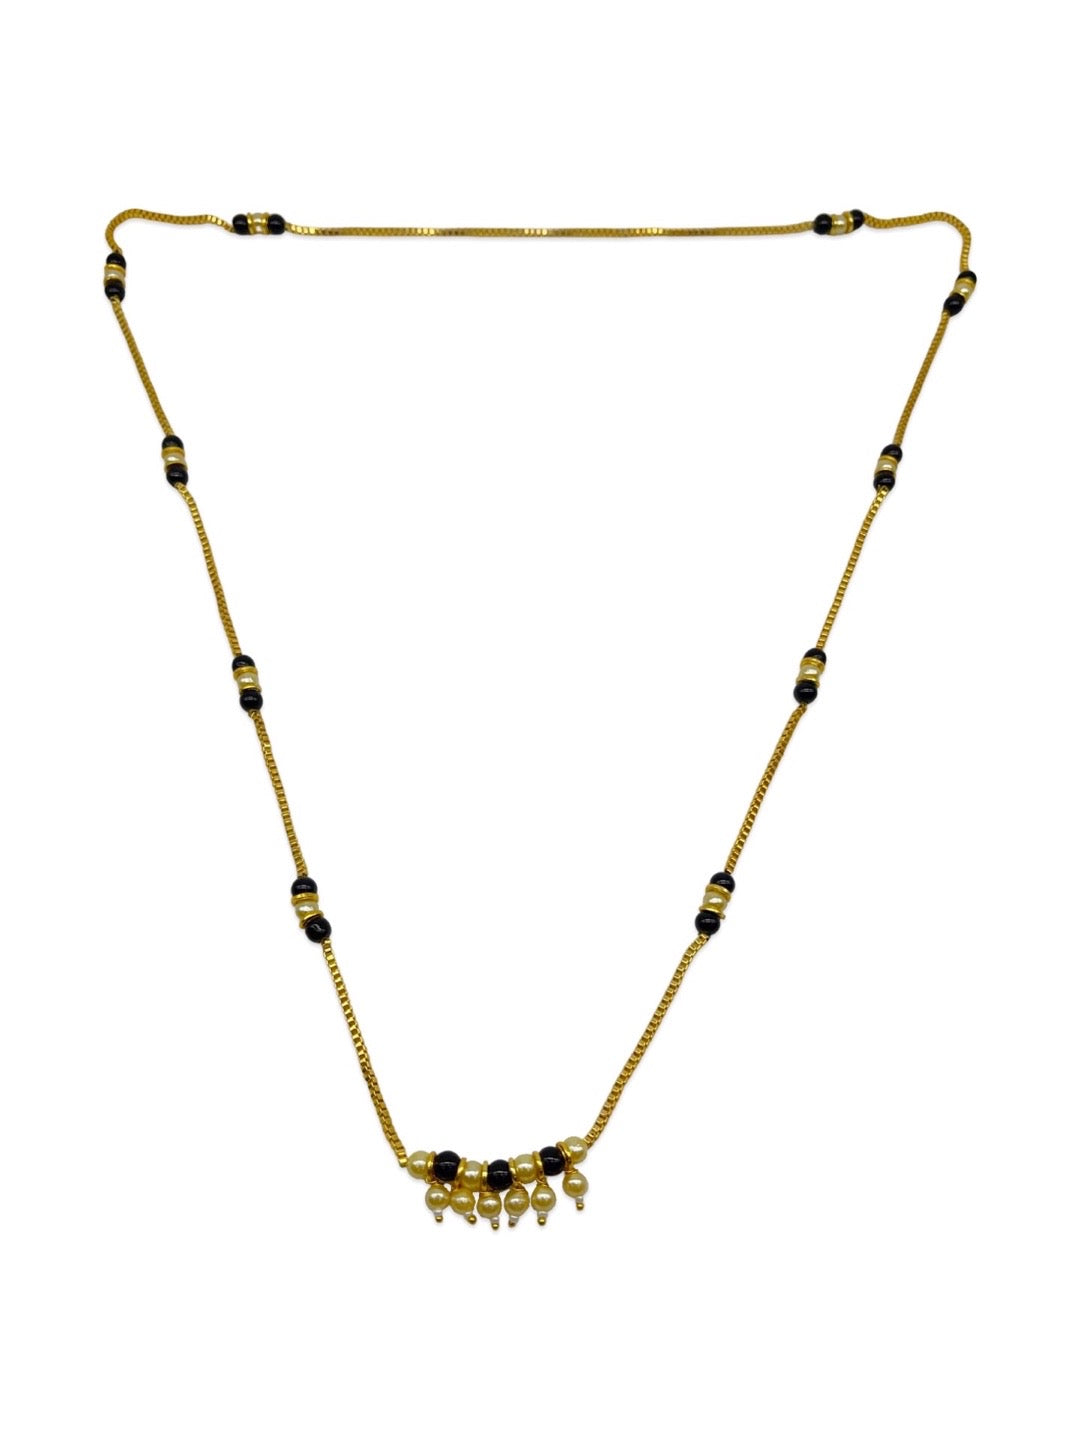 South Indian Long Mangalsutra Designs White Pearls Pendant Black Beads Gold Chain